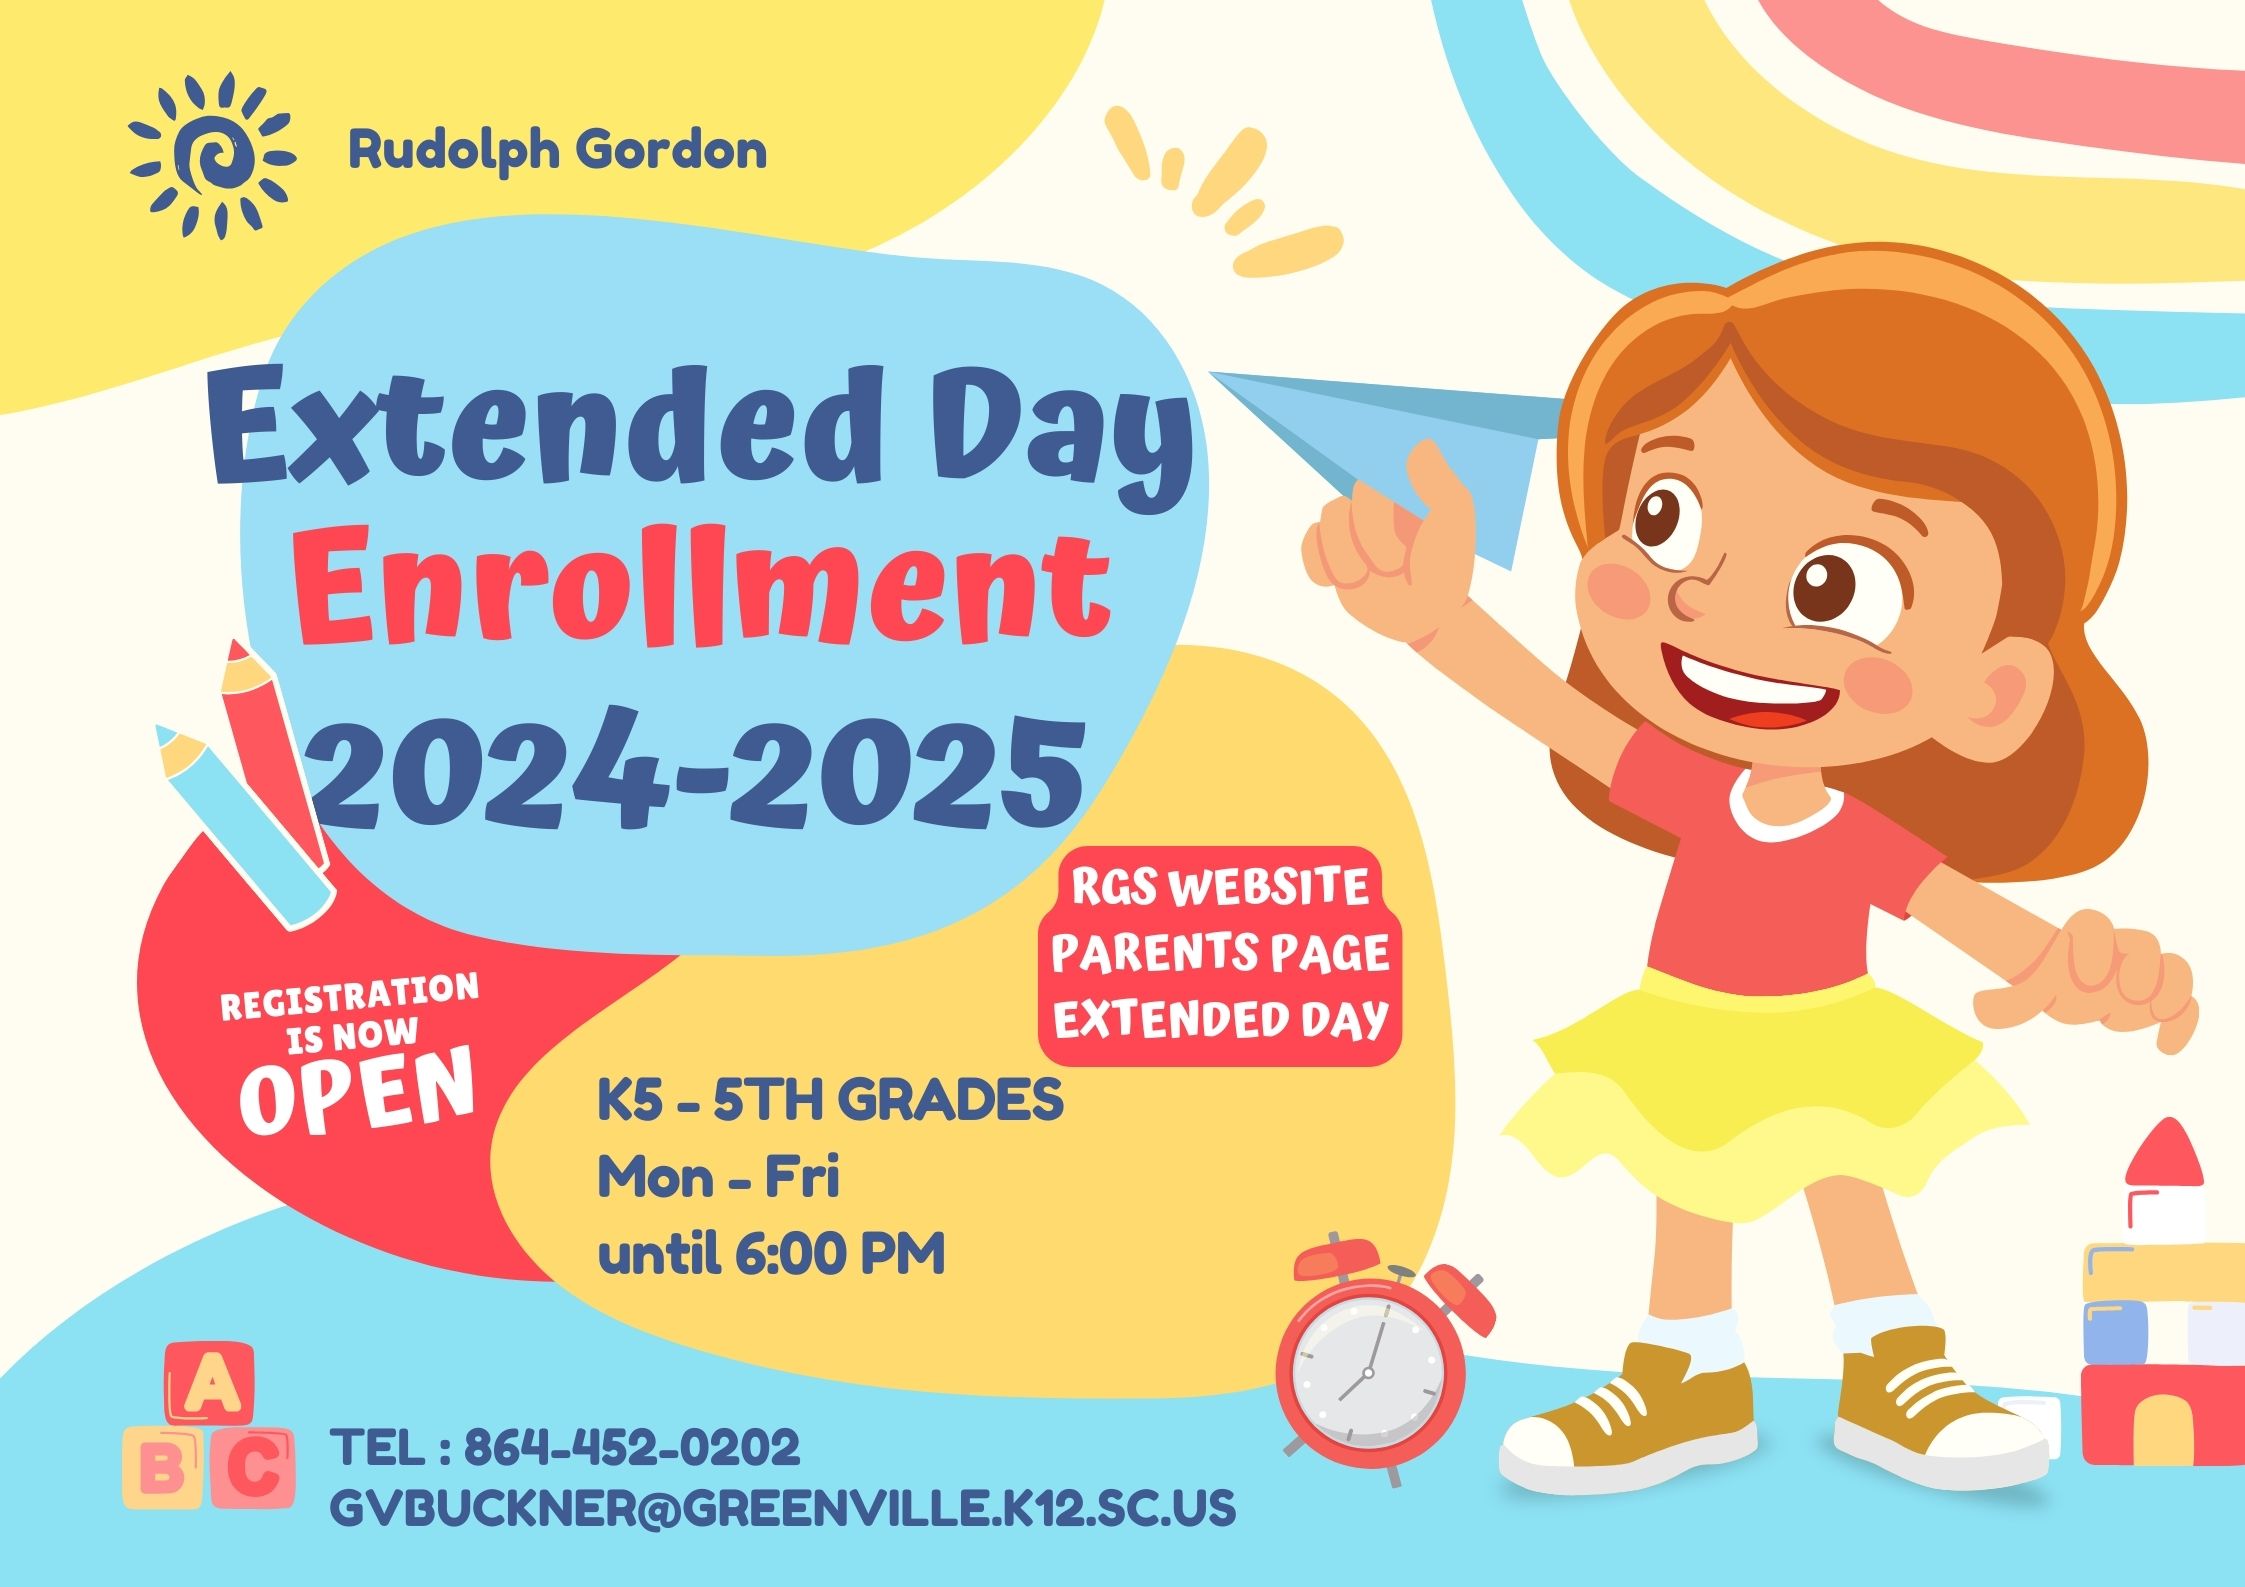 Extended Day Opens March 4 for 2024-25